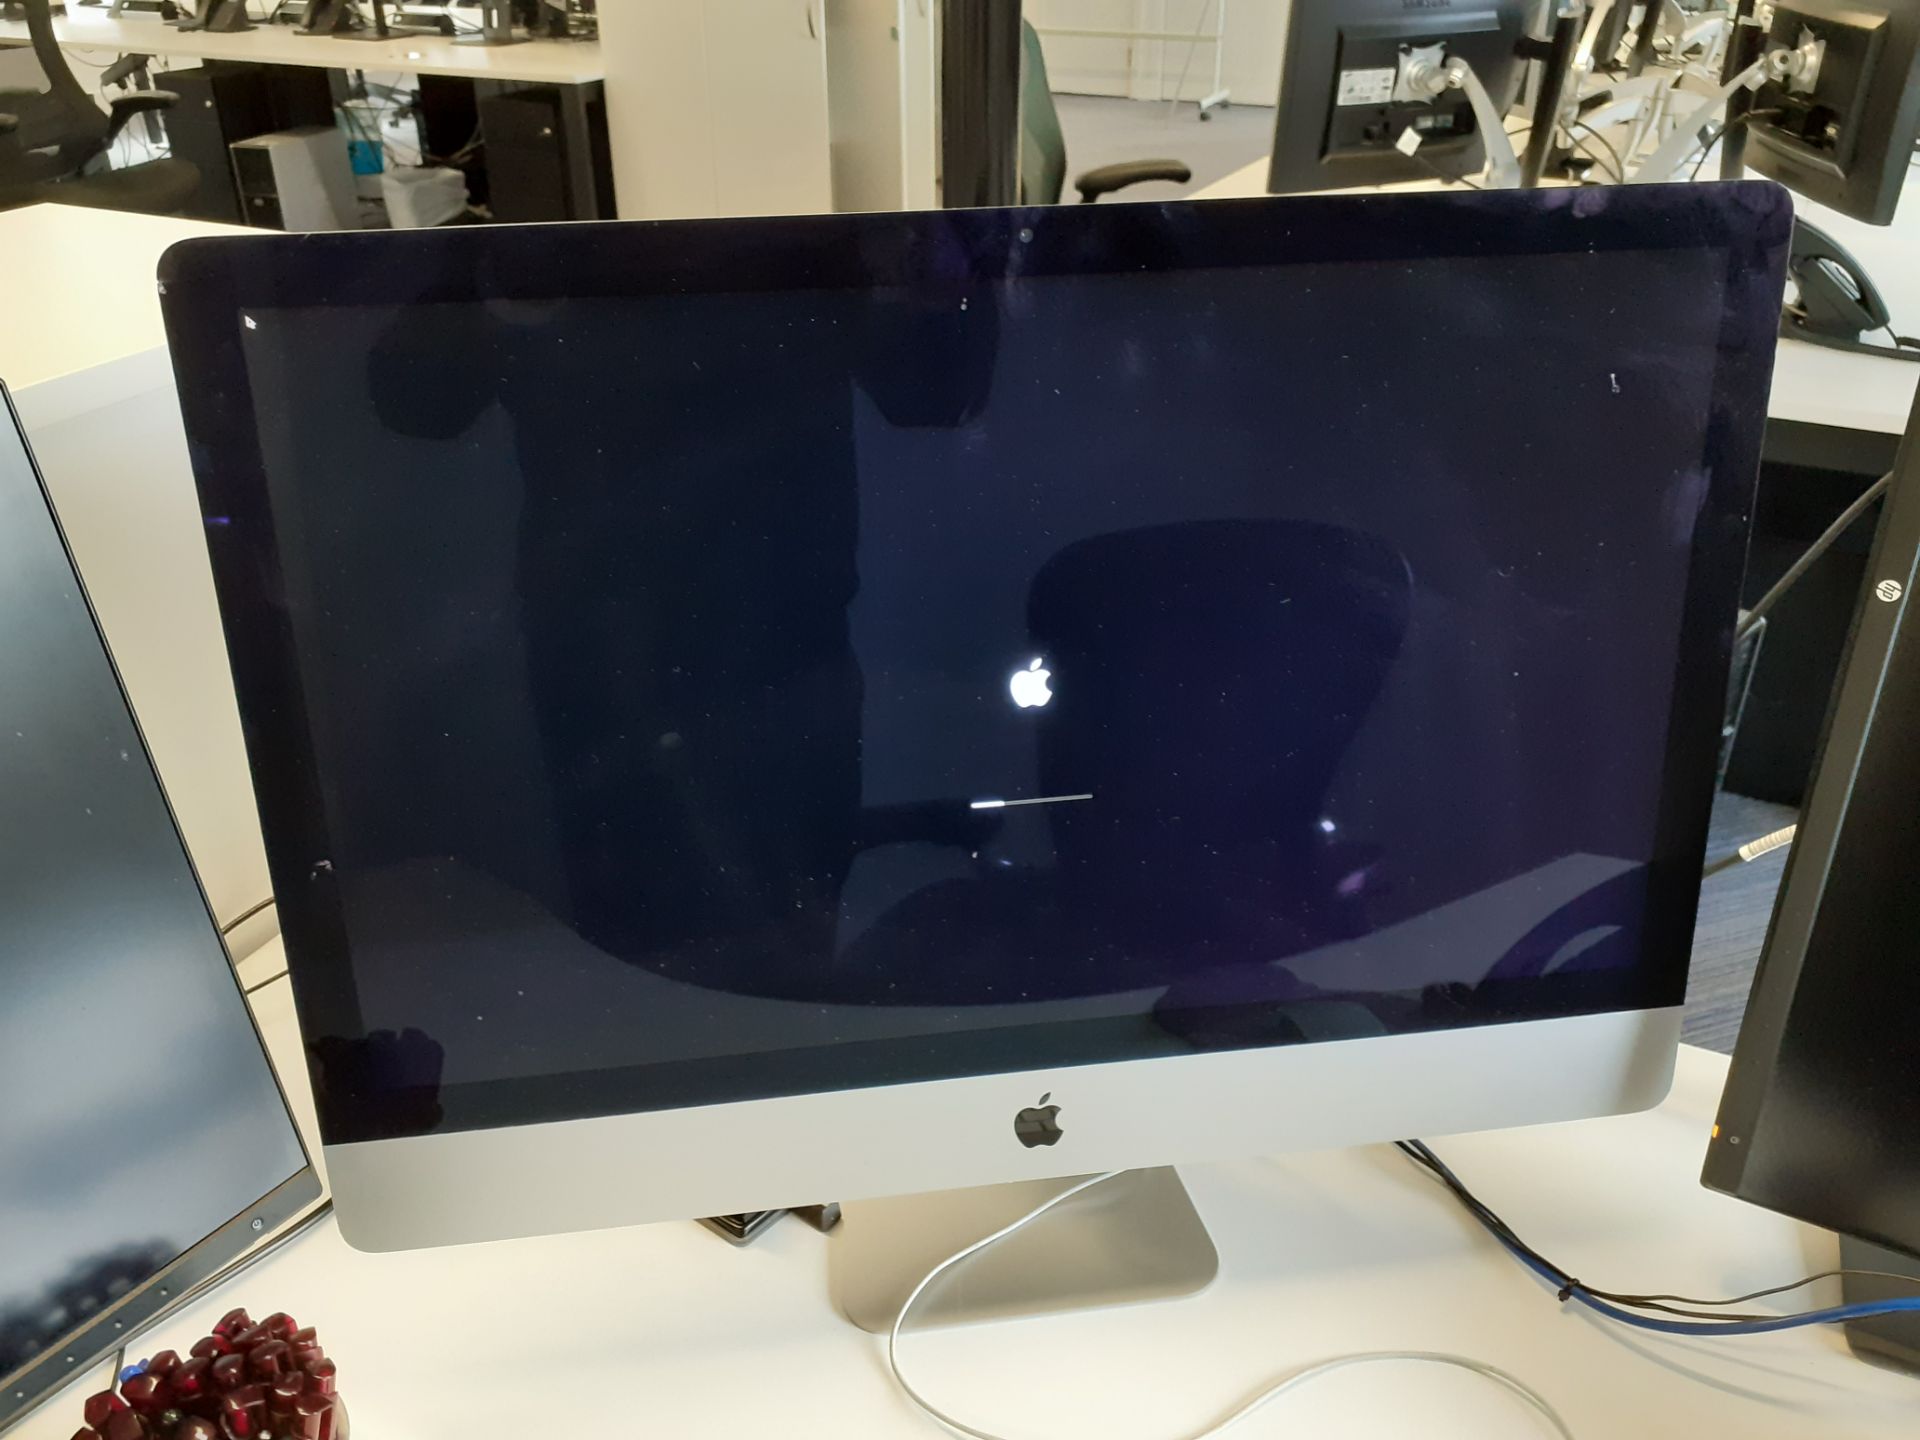 Apple iMac 27” 5K A1419 Computer, 4Ghz, 32Gb, Serial Number DGKRC08XGQ18 (Late 2015) with Keyboard & - Image 2 of 5